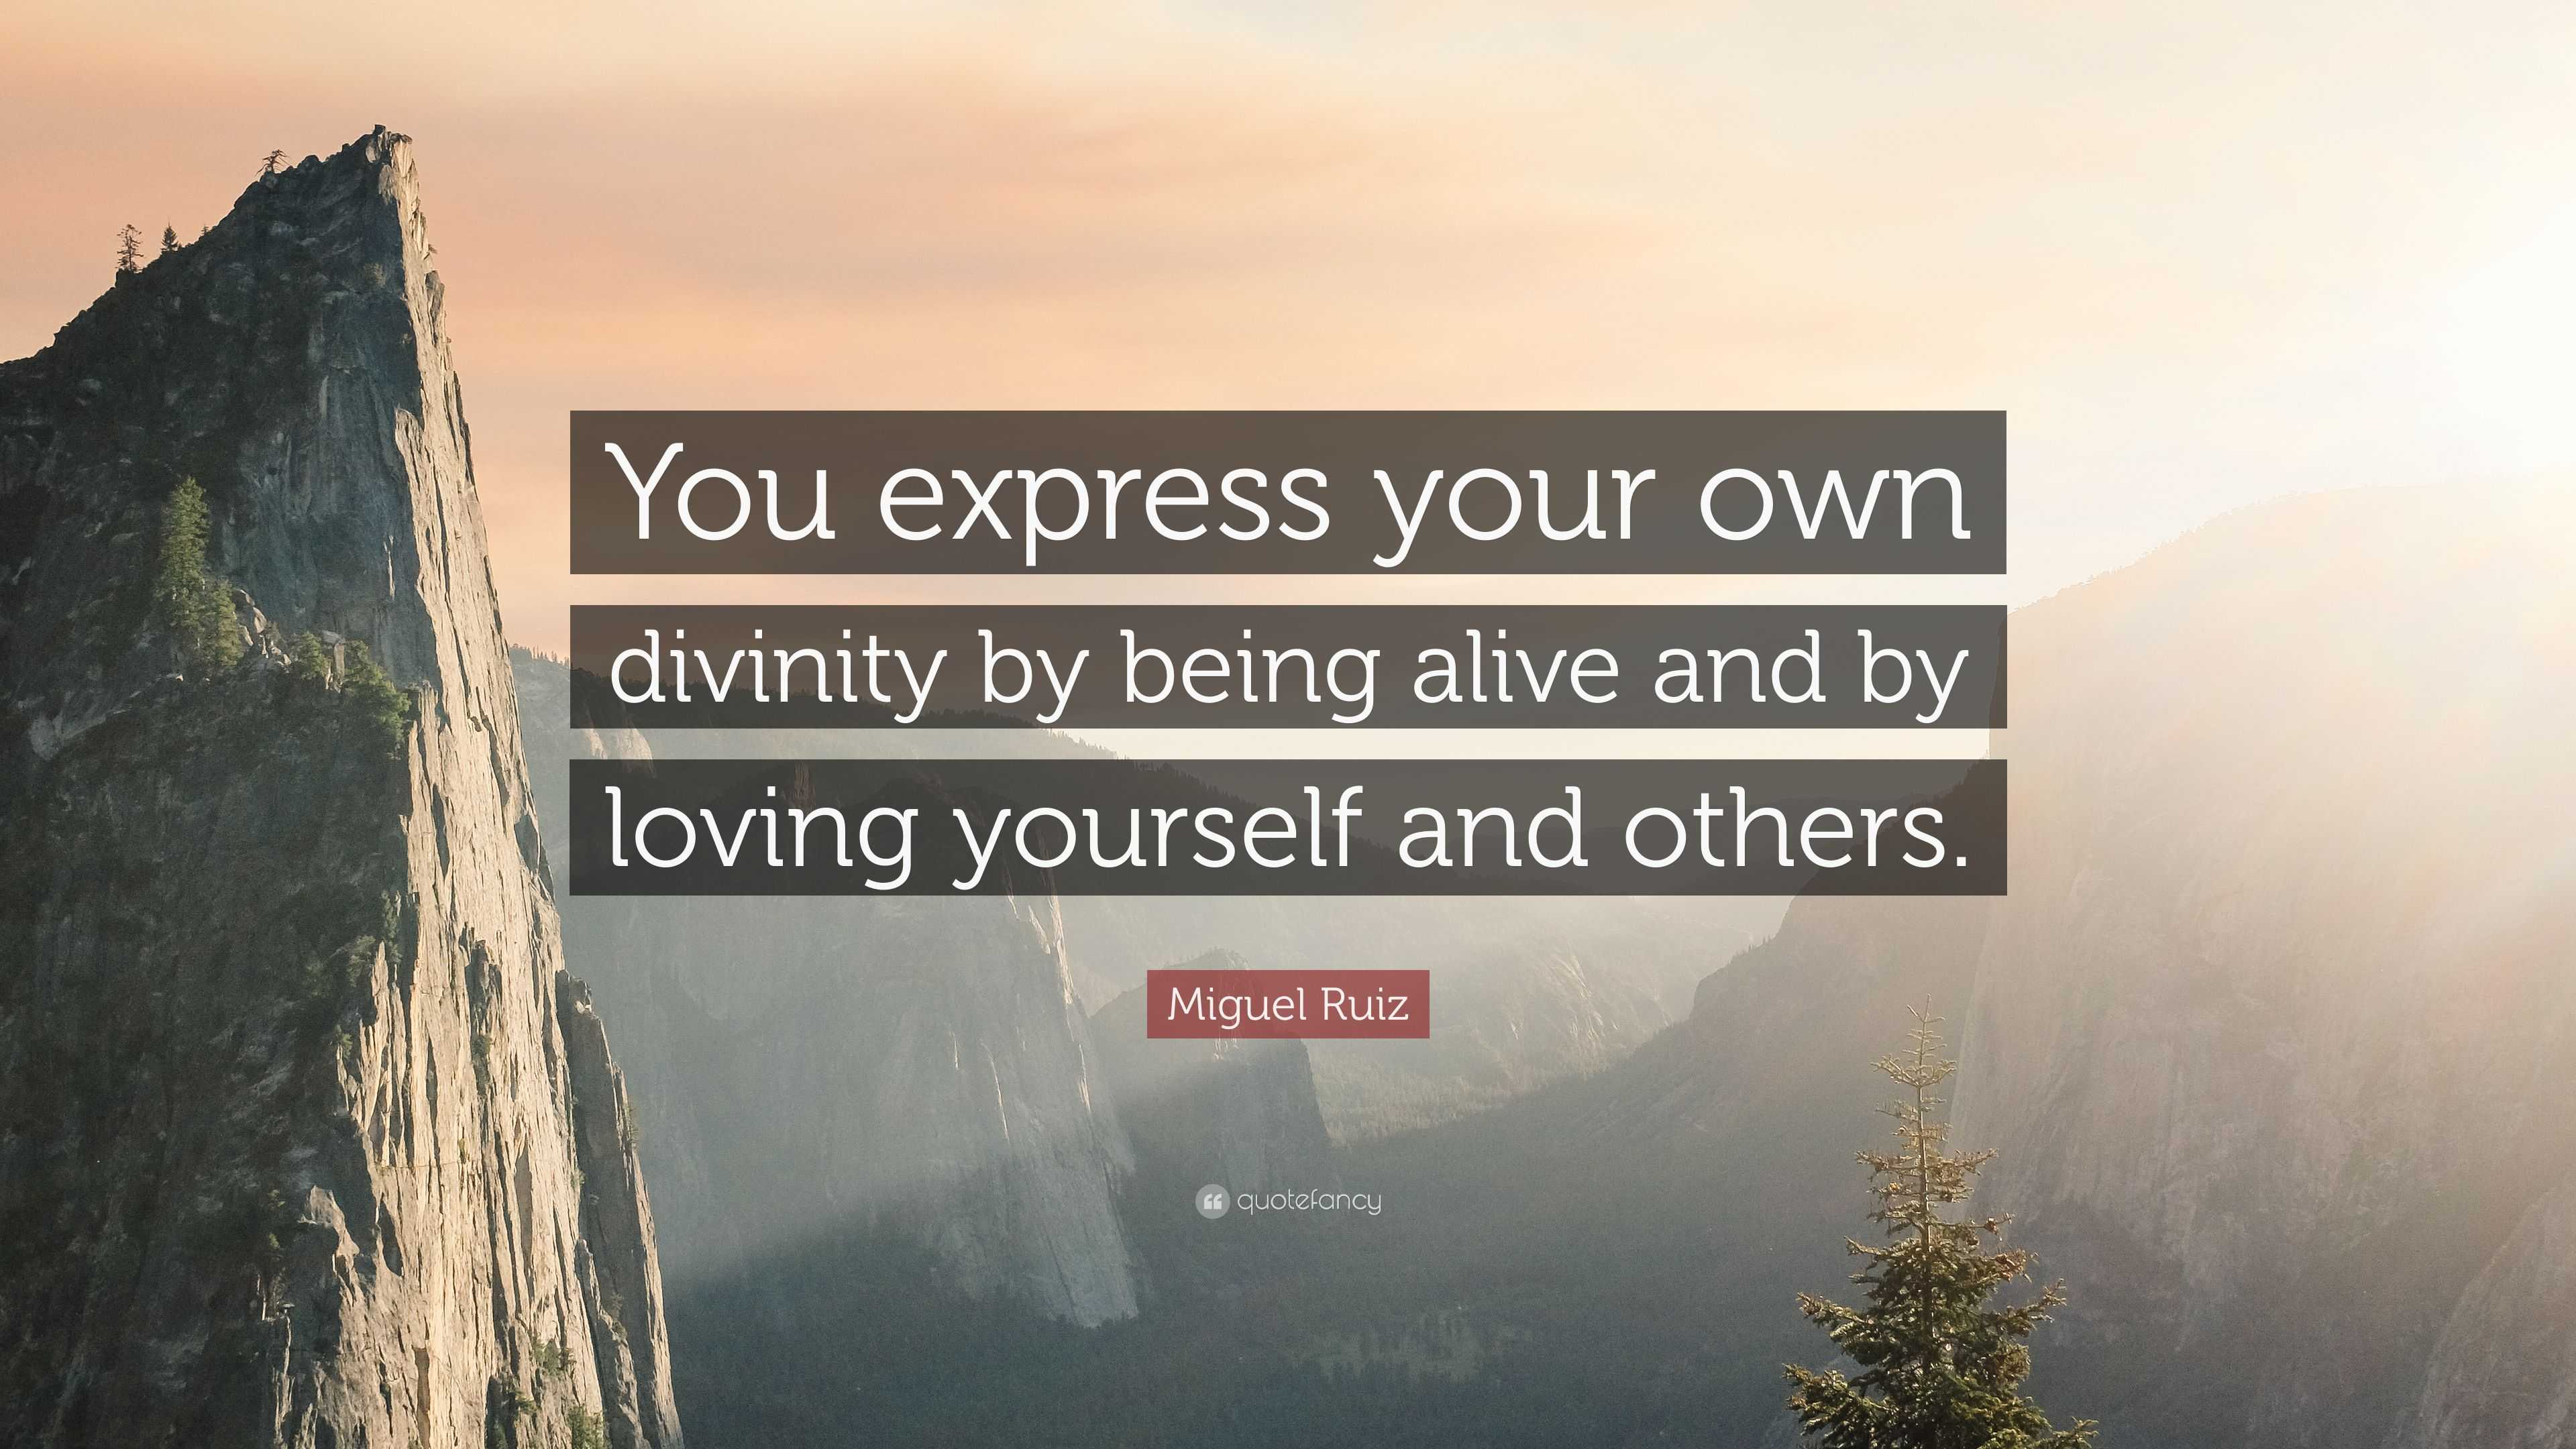 Miguel Ruiz Quote: “You express your own divinity by being alive and by ...